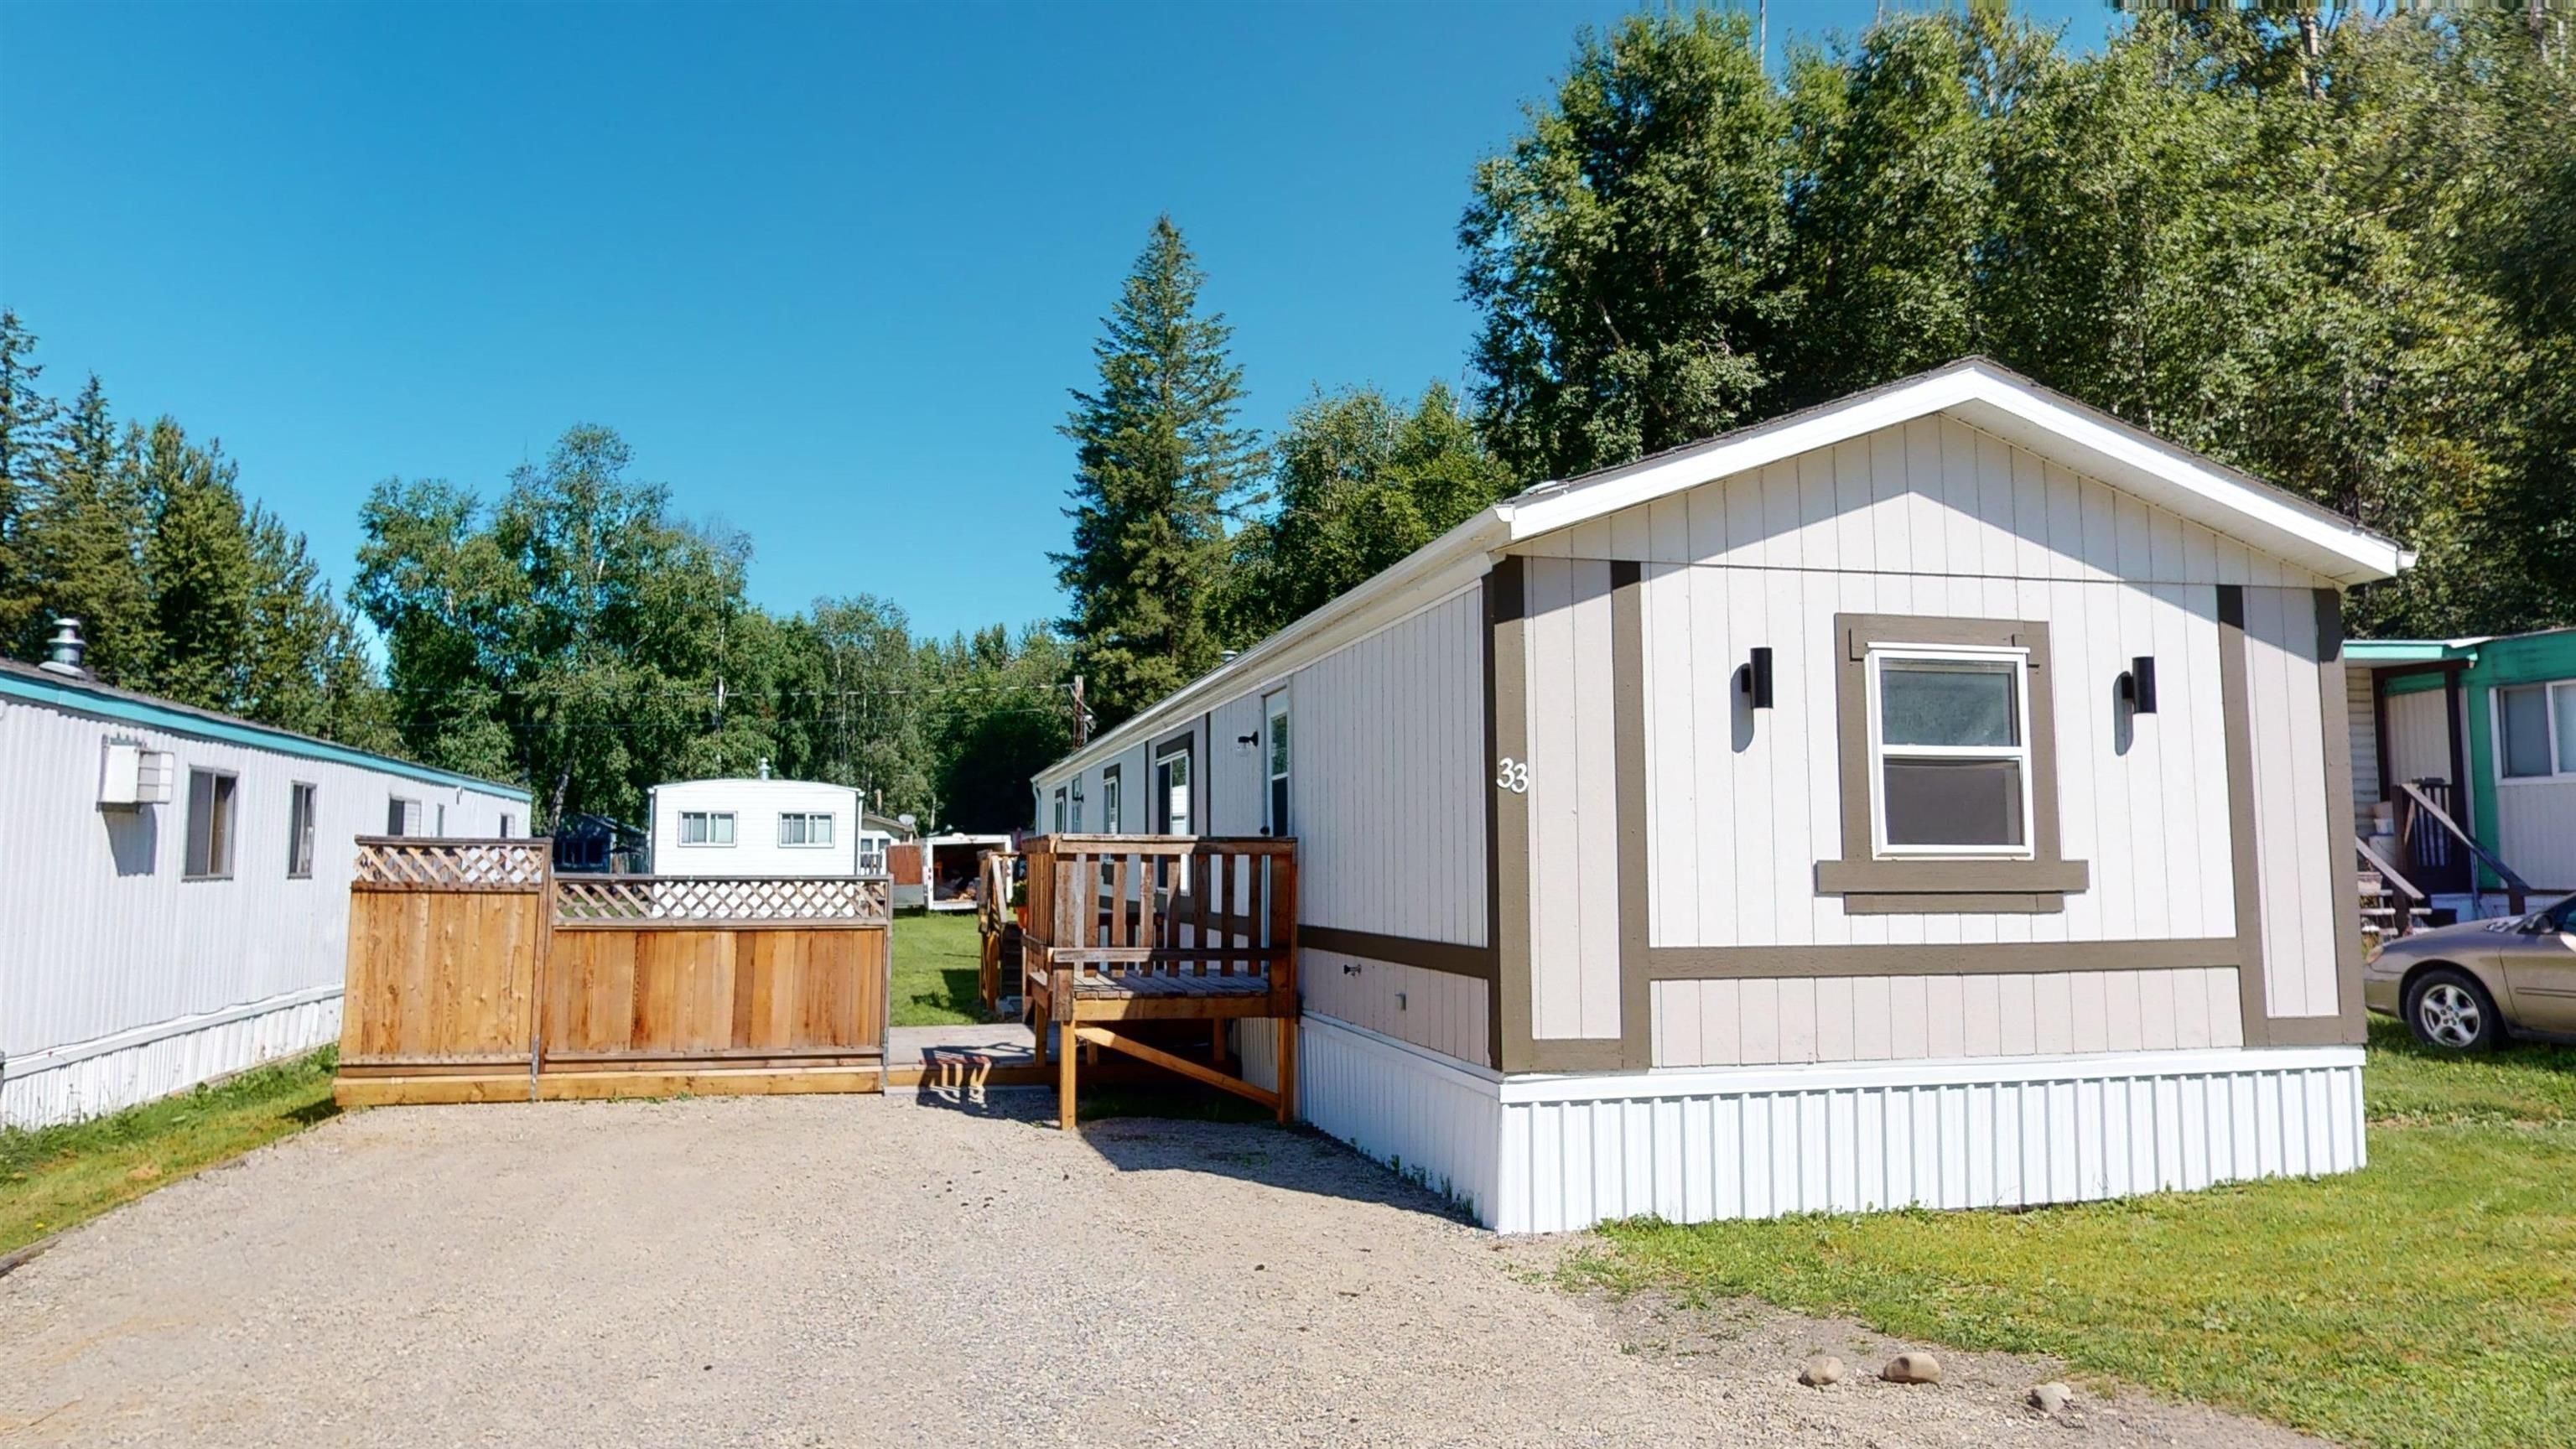 I have sold a property at 33 3656 HILBORN RD in Quesnel
